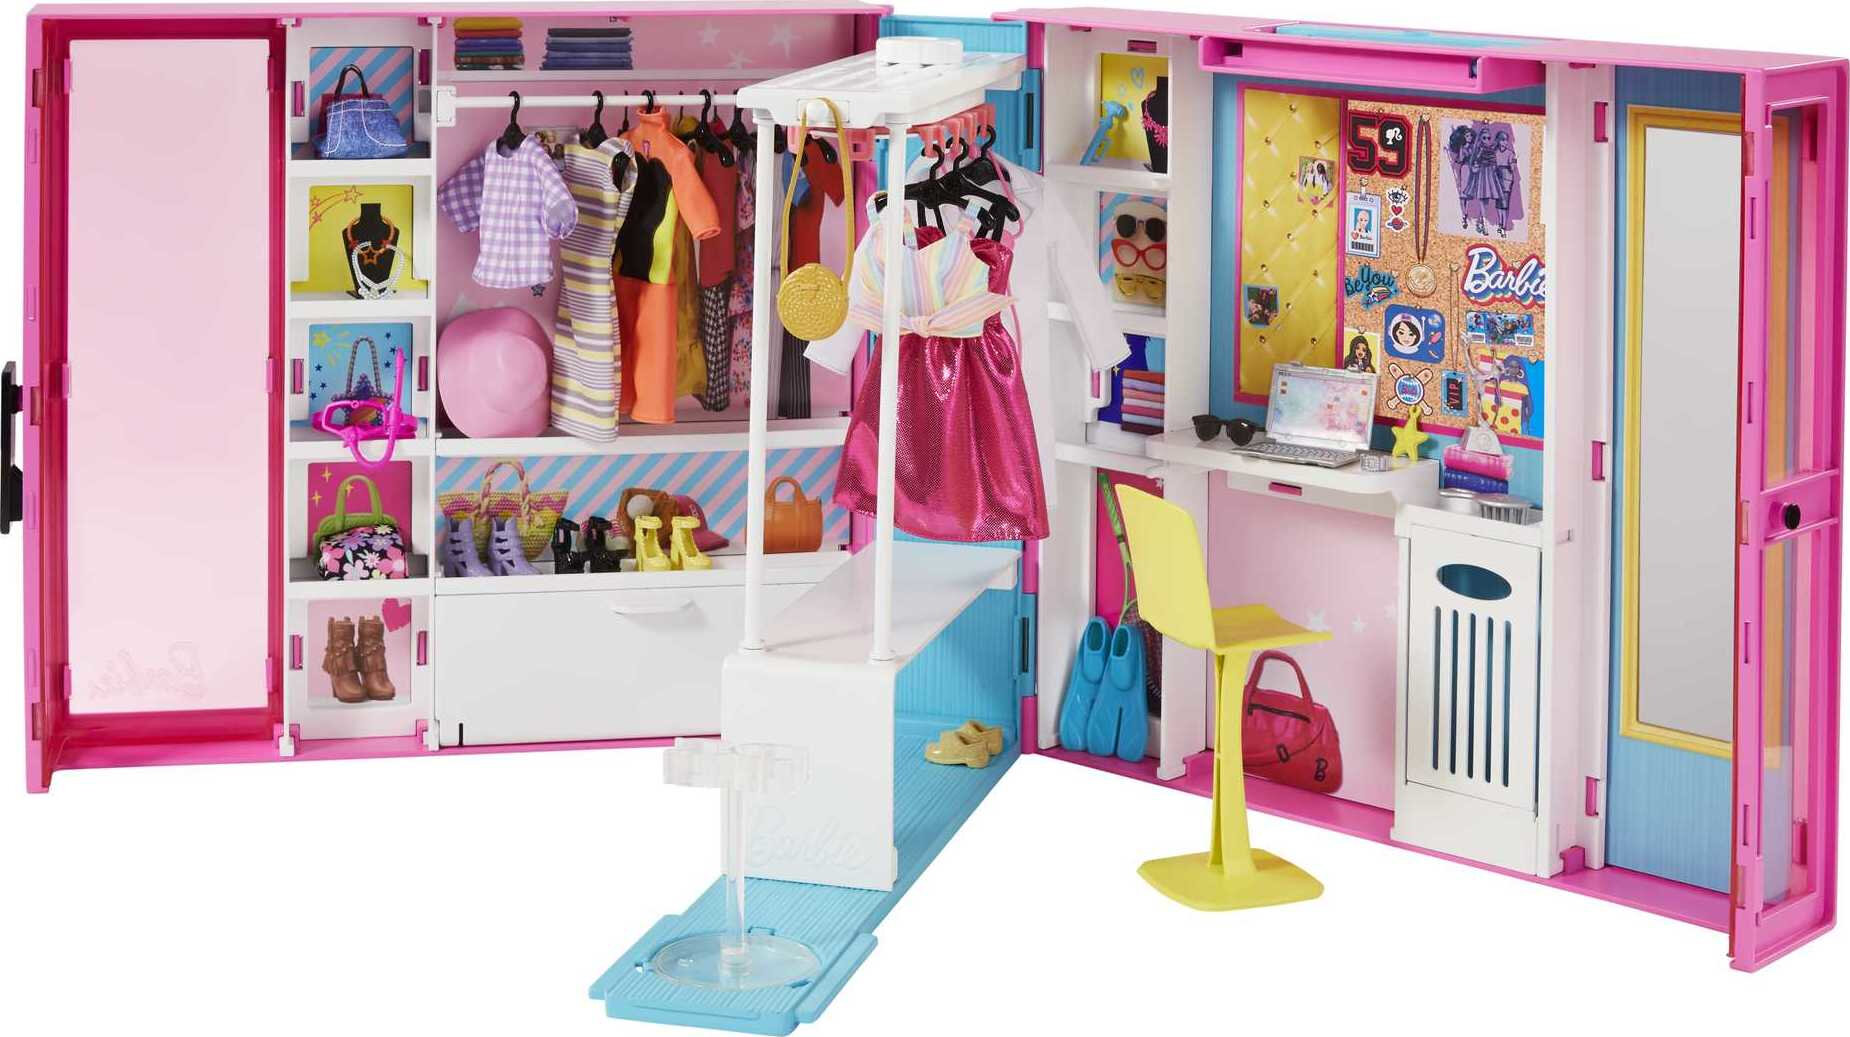 Barbie Dream Closet Playset with 30+ Clothes and Accessories, Mirror and Desk - image 1 of 7